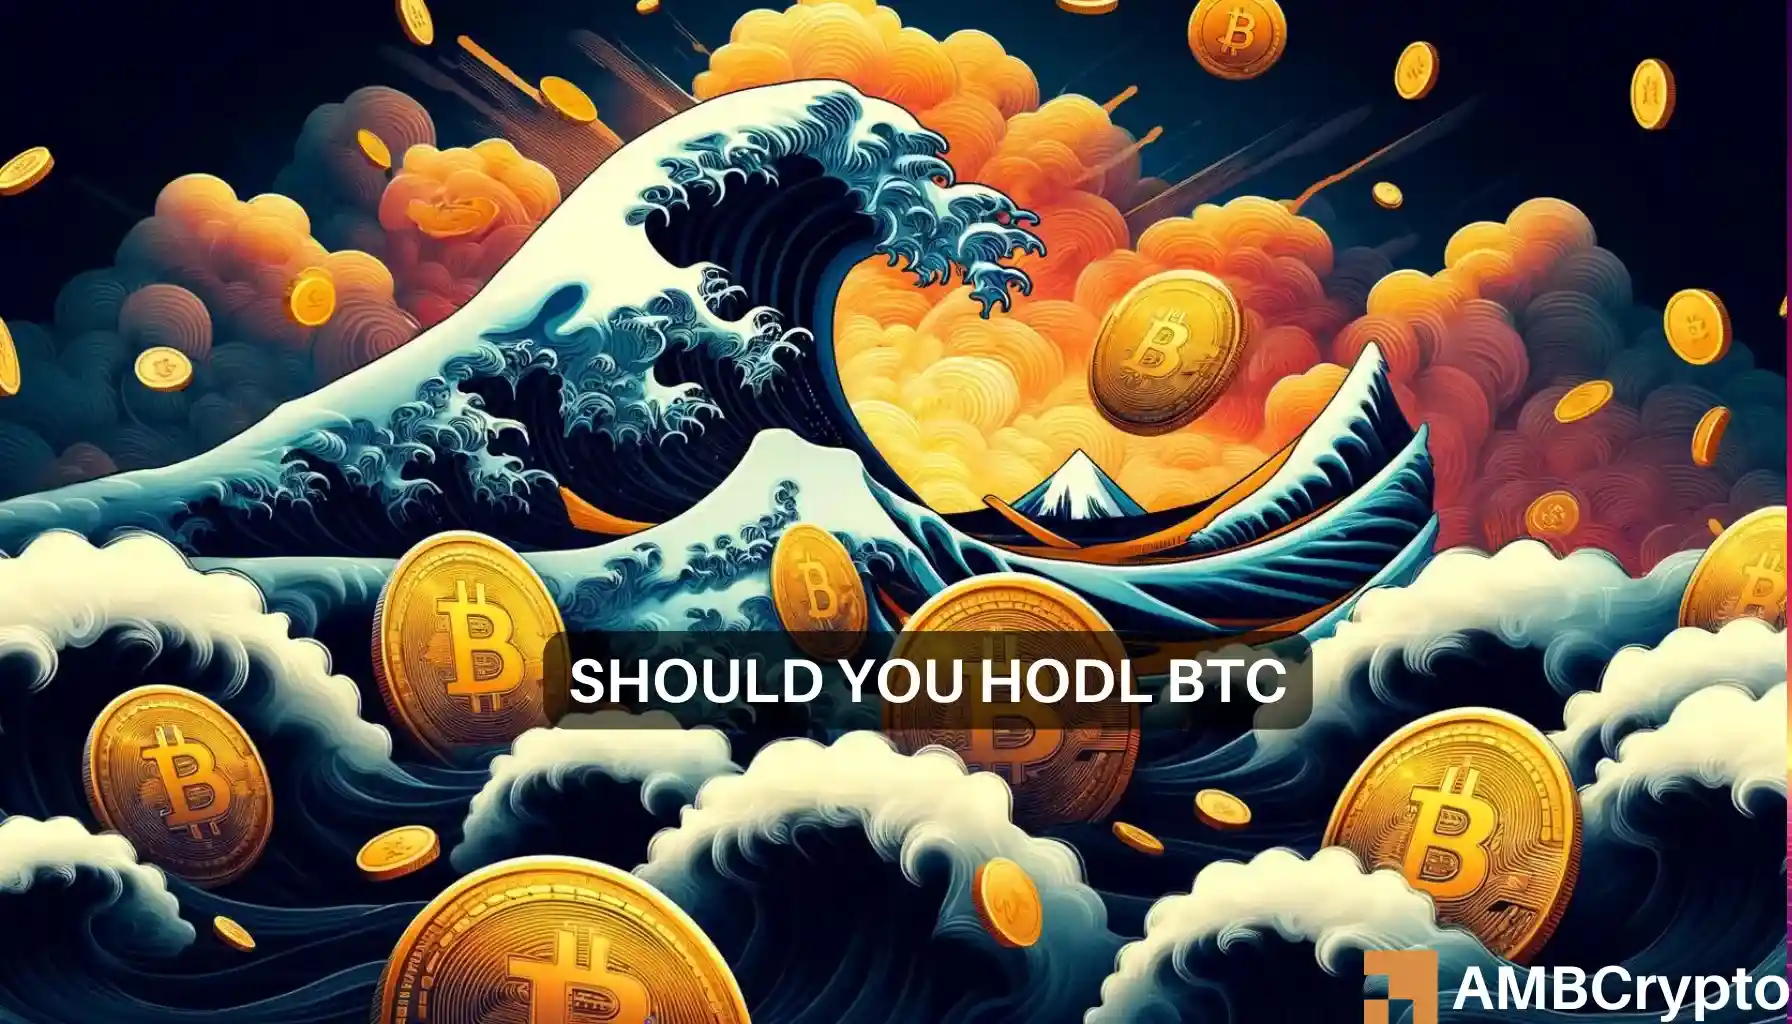 Bitcoin: Will short term holders cause problems for BTC's price?